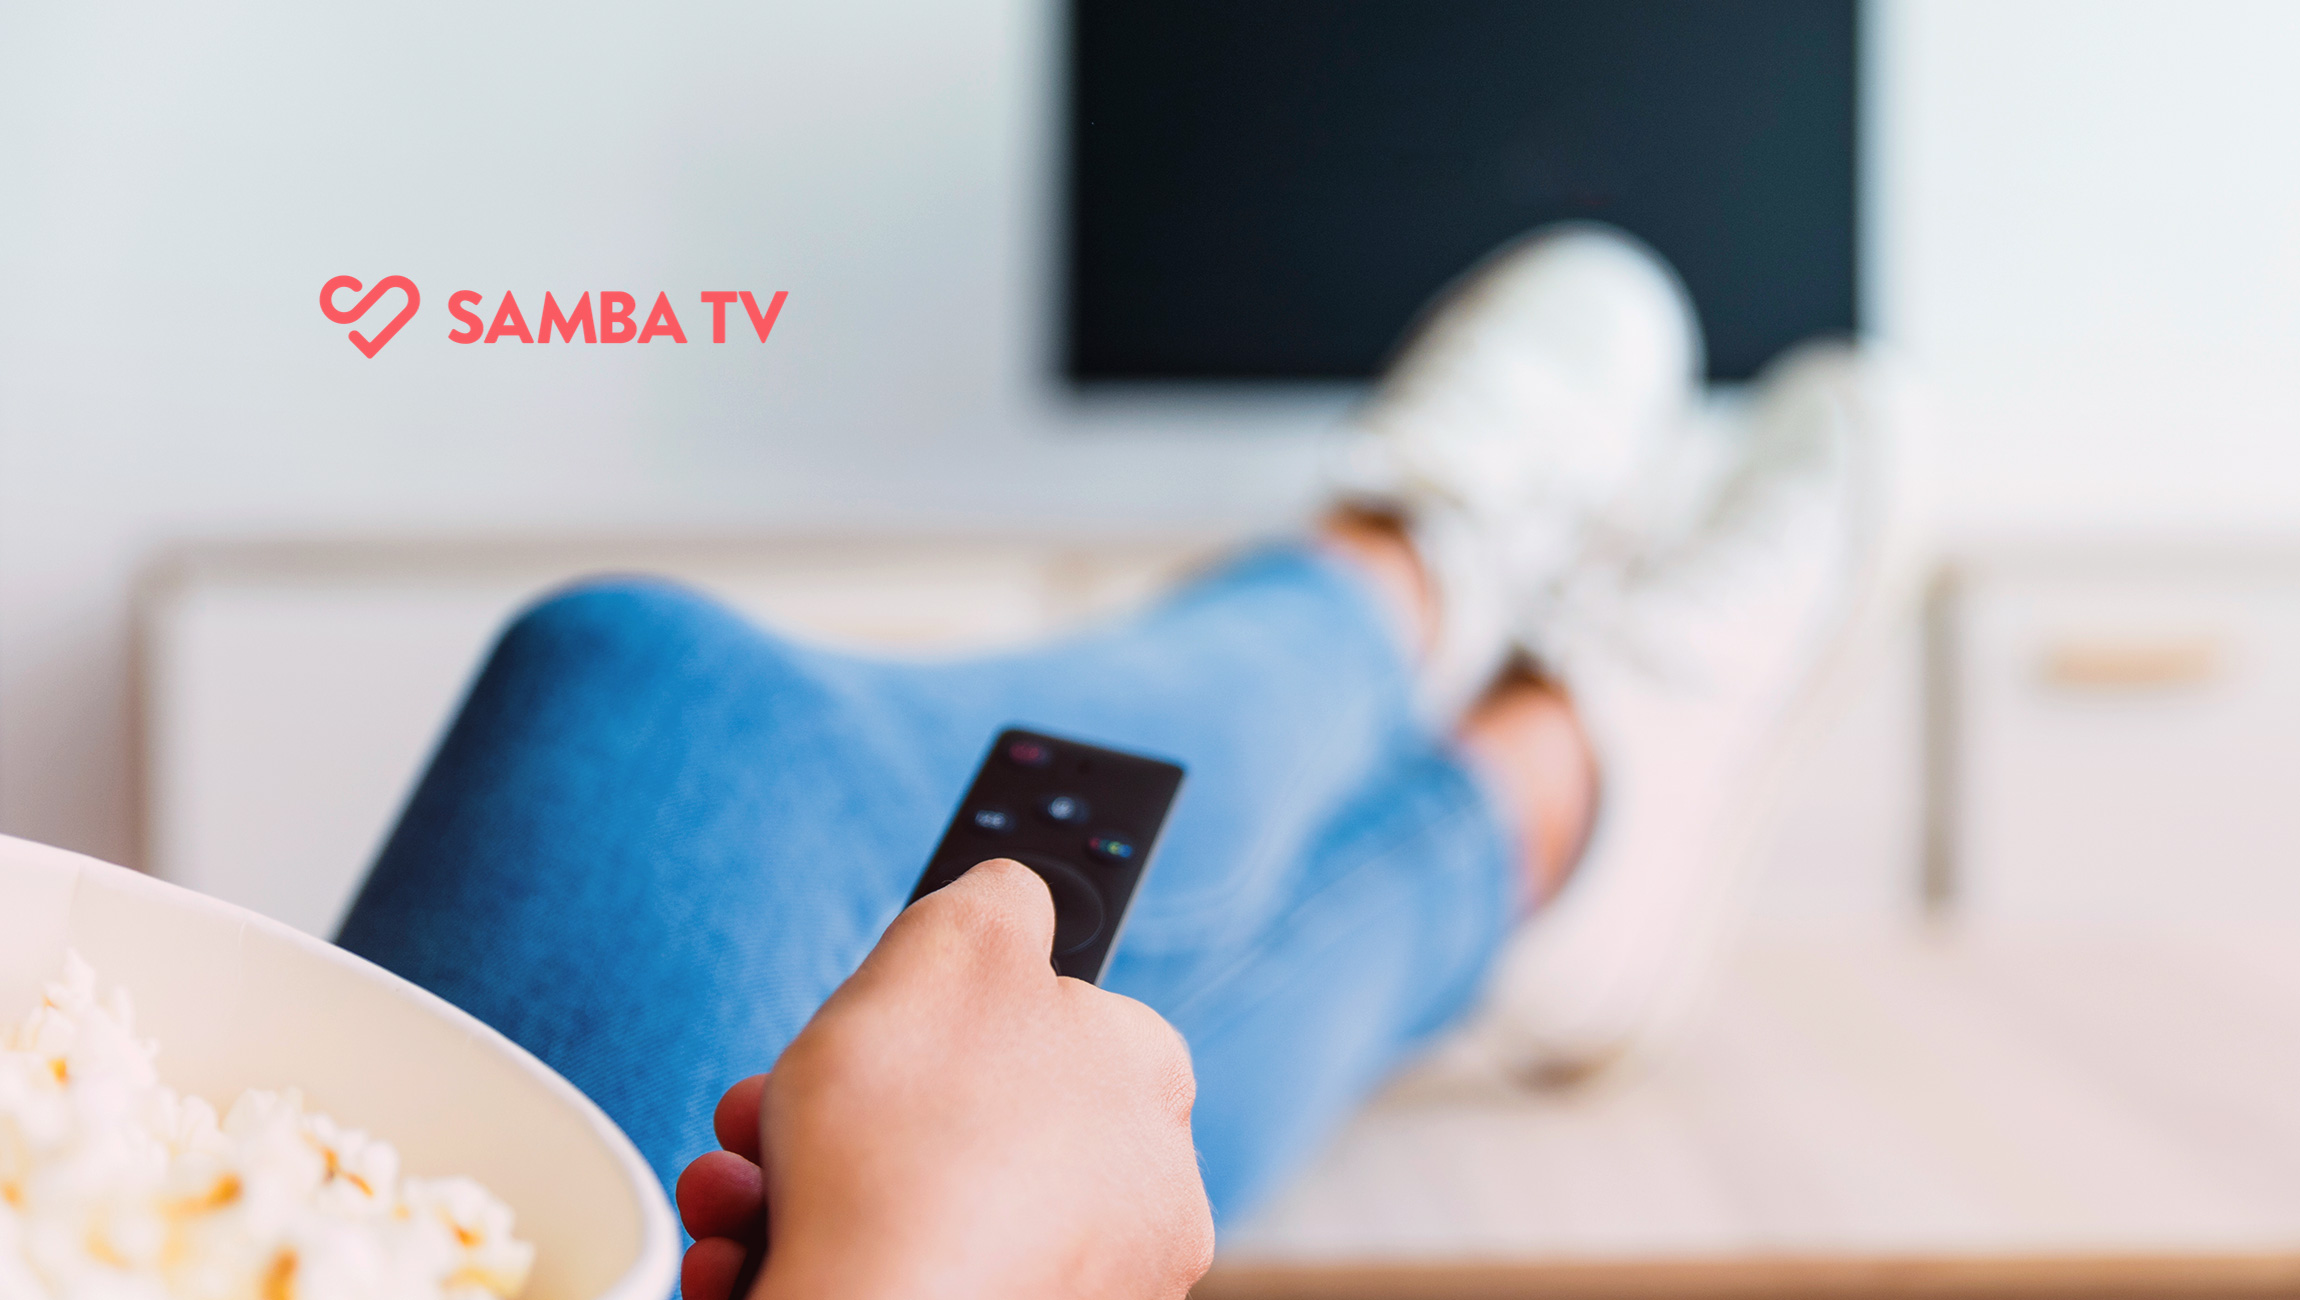 The Trade Desk Partners with Samba TV to Unify Digital and TV Media Strategies for the World’s Largest Advertisers